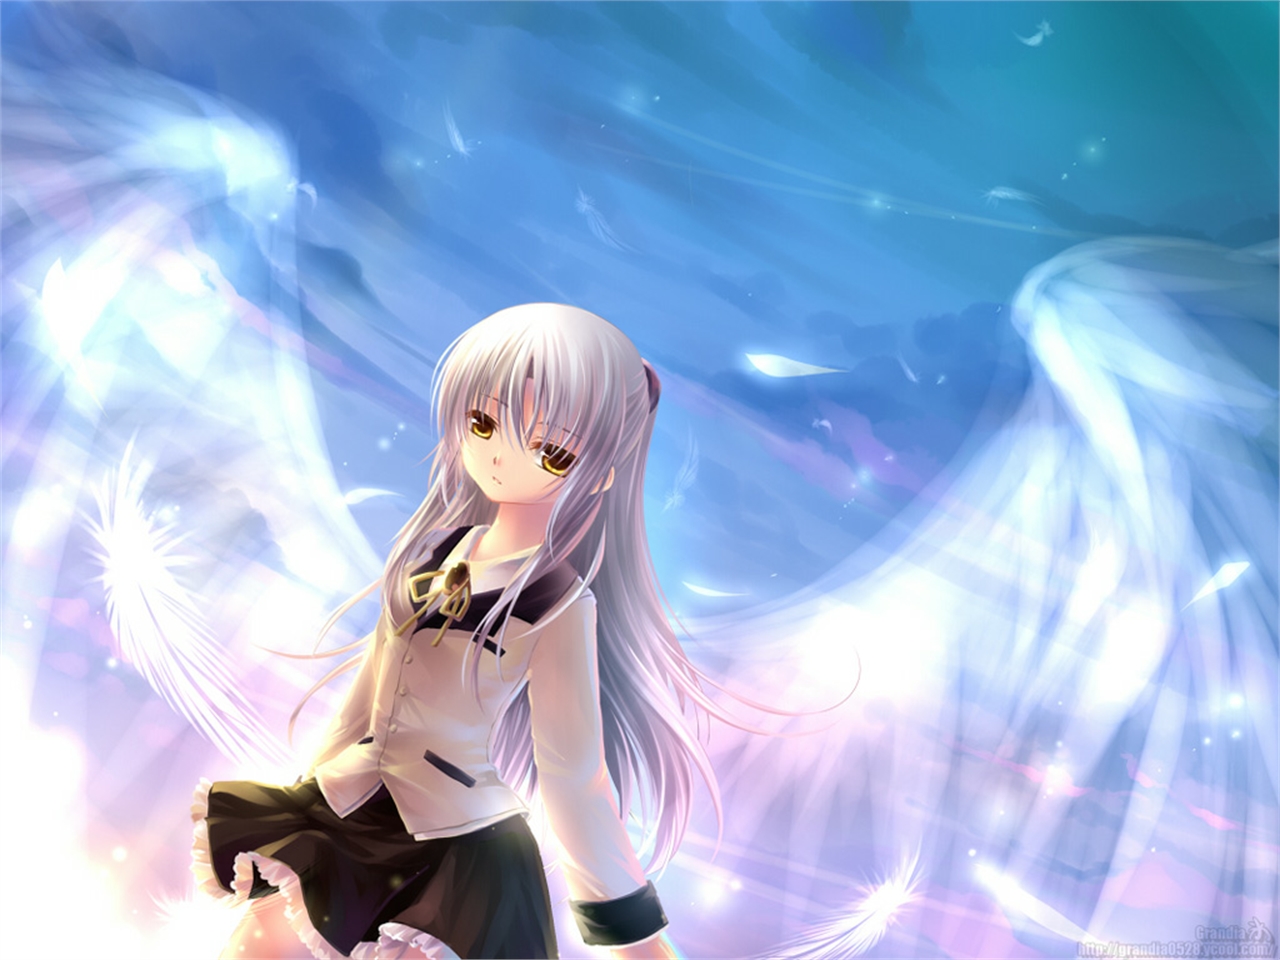 Download wallpaper from anime Angel Beats! with tags: Windows XP, Kanade Tachibana